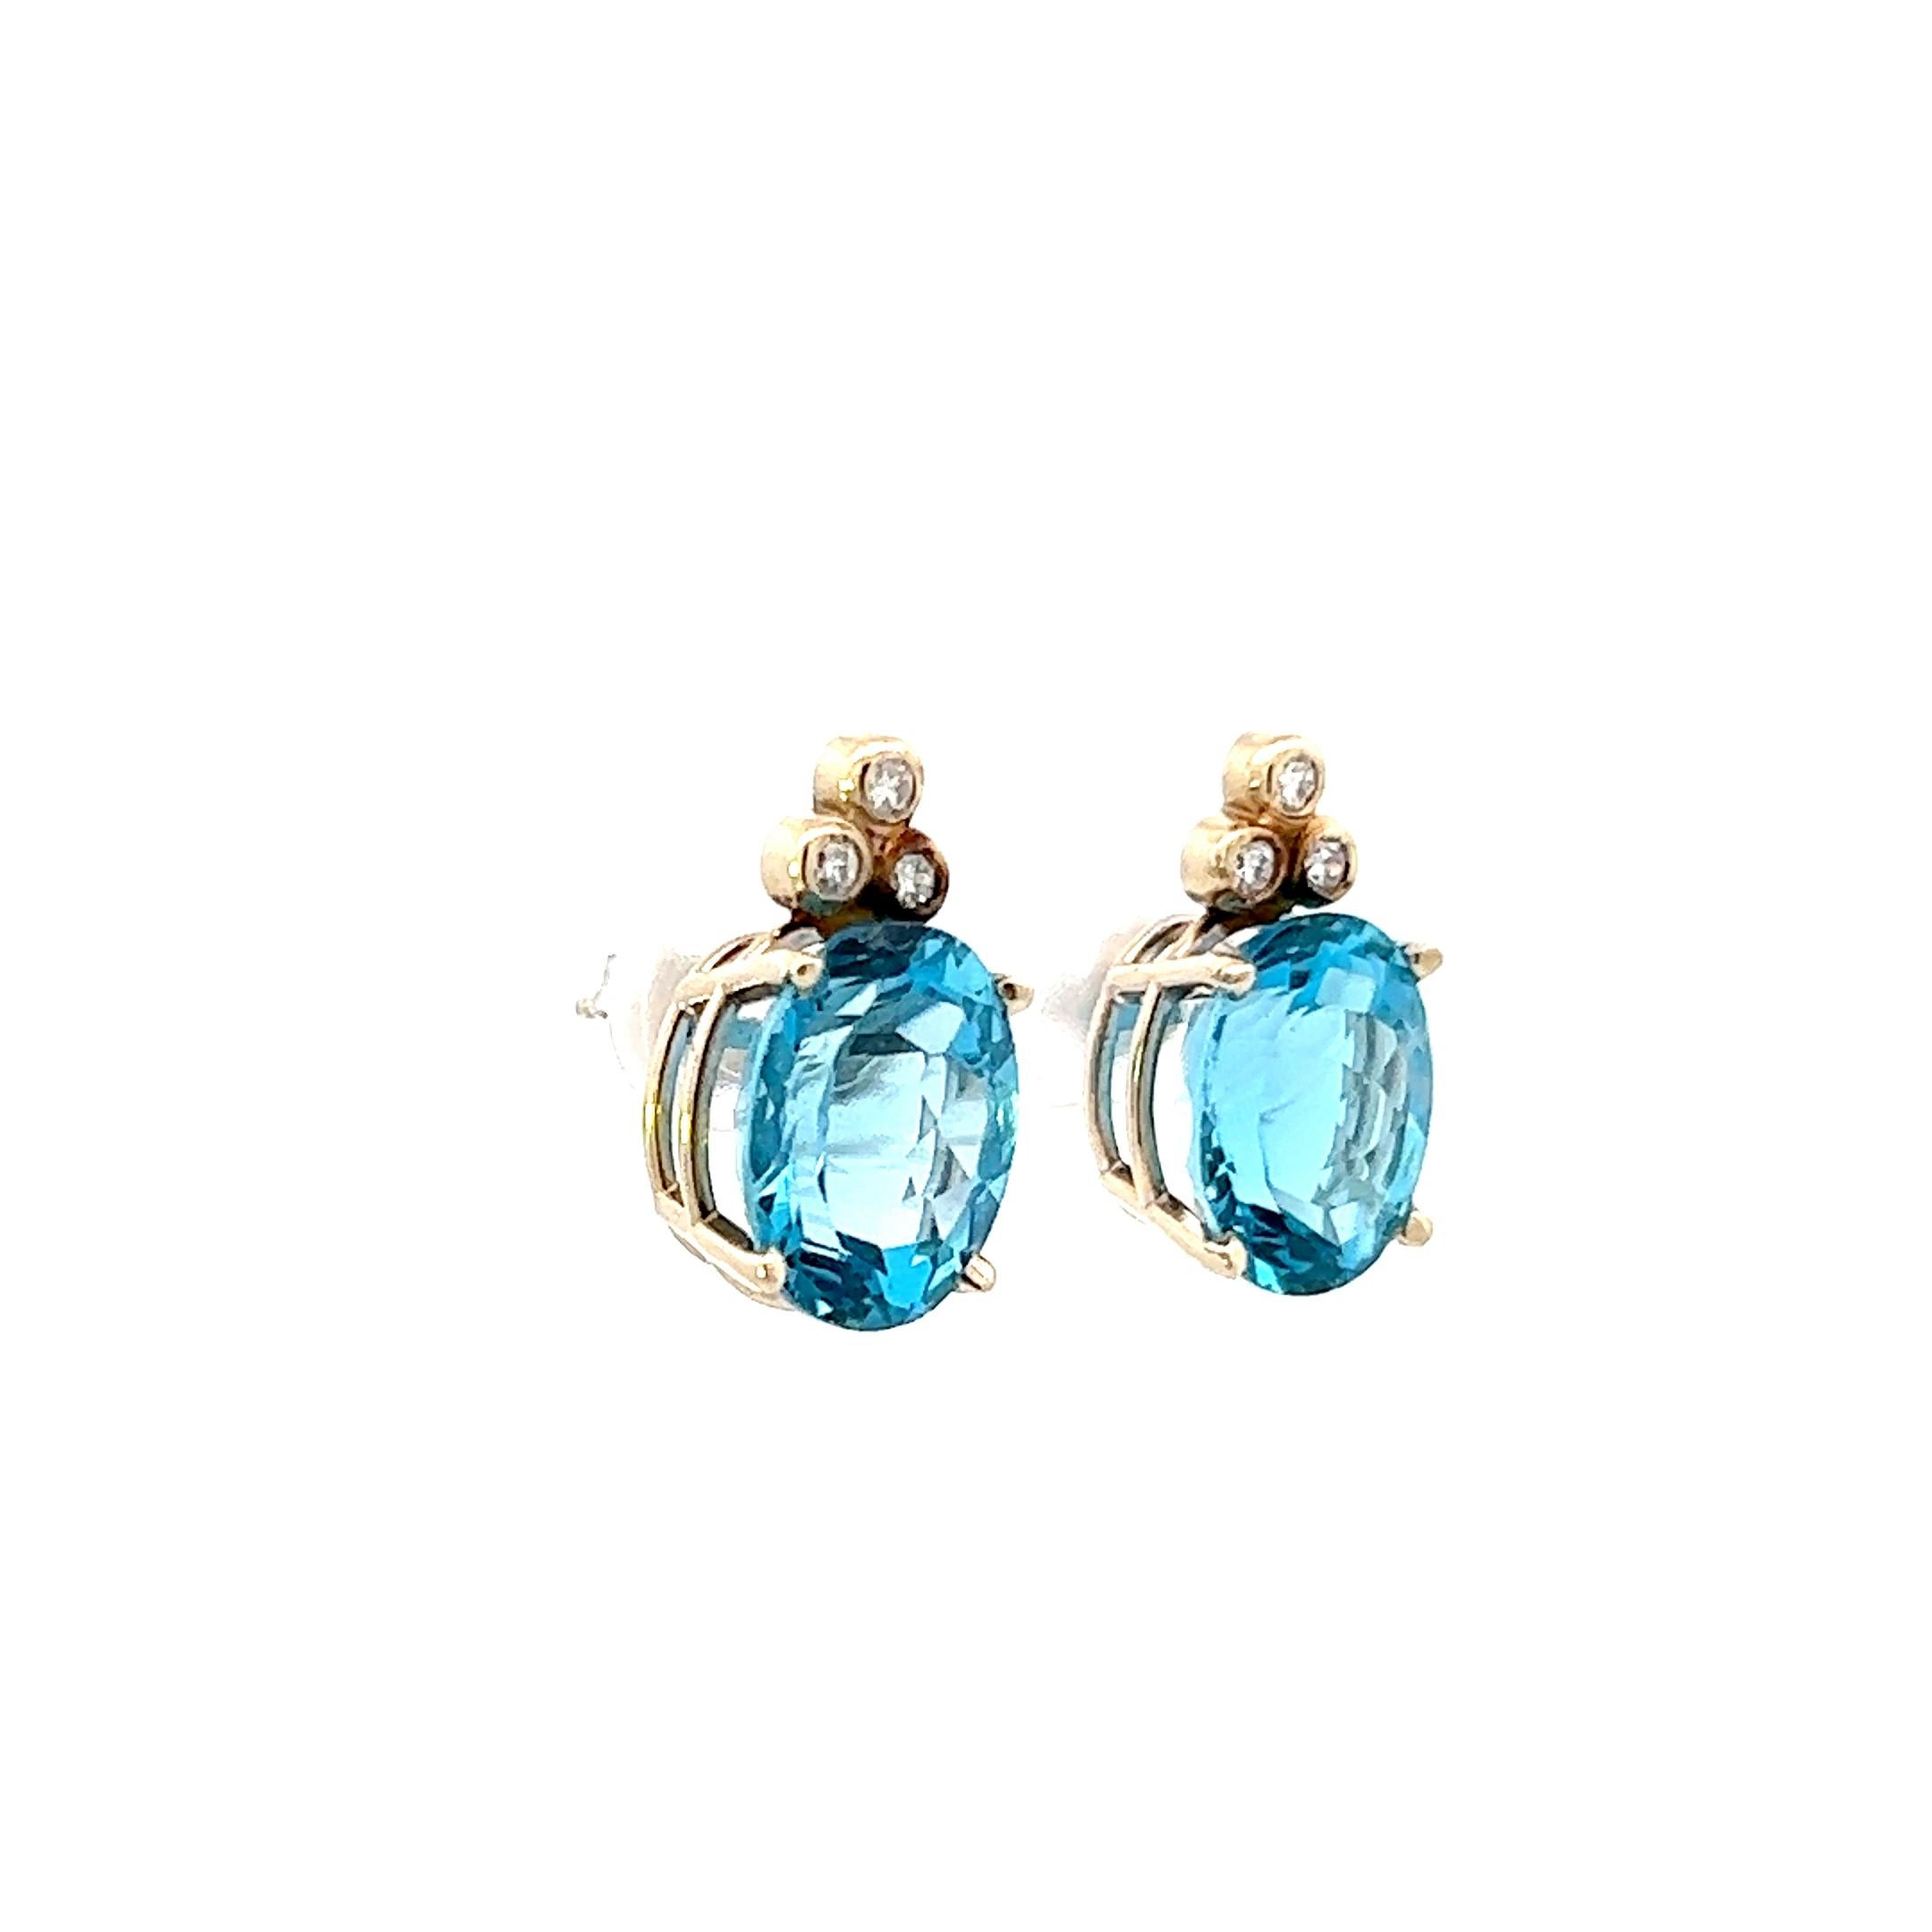 This is a beautiful pair of contemporary earrings made in 14k yellow gold and featuring both soft sky blue topaz and white firey diamond. Each individual earring features three round cut, Si1 clarity, H color diamonds as well as a large 6 ct, oval